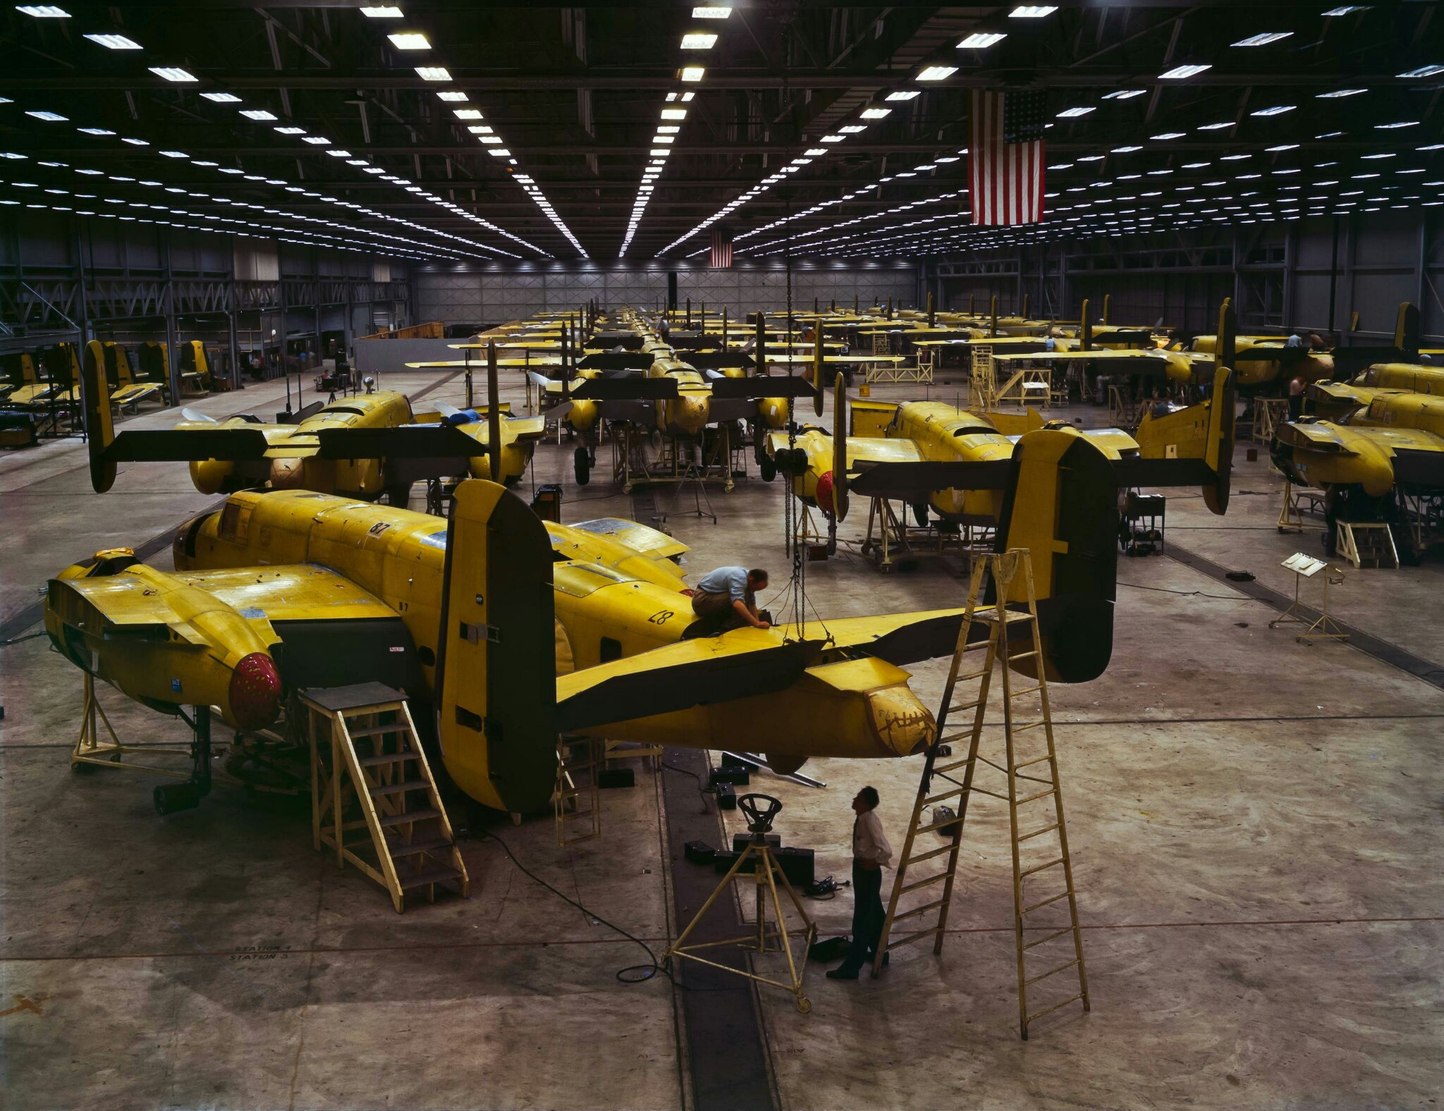 Color photo from a world war 2 bomber factory. - meme